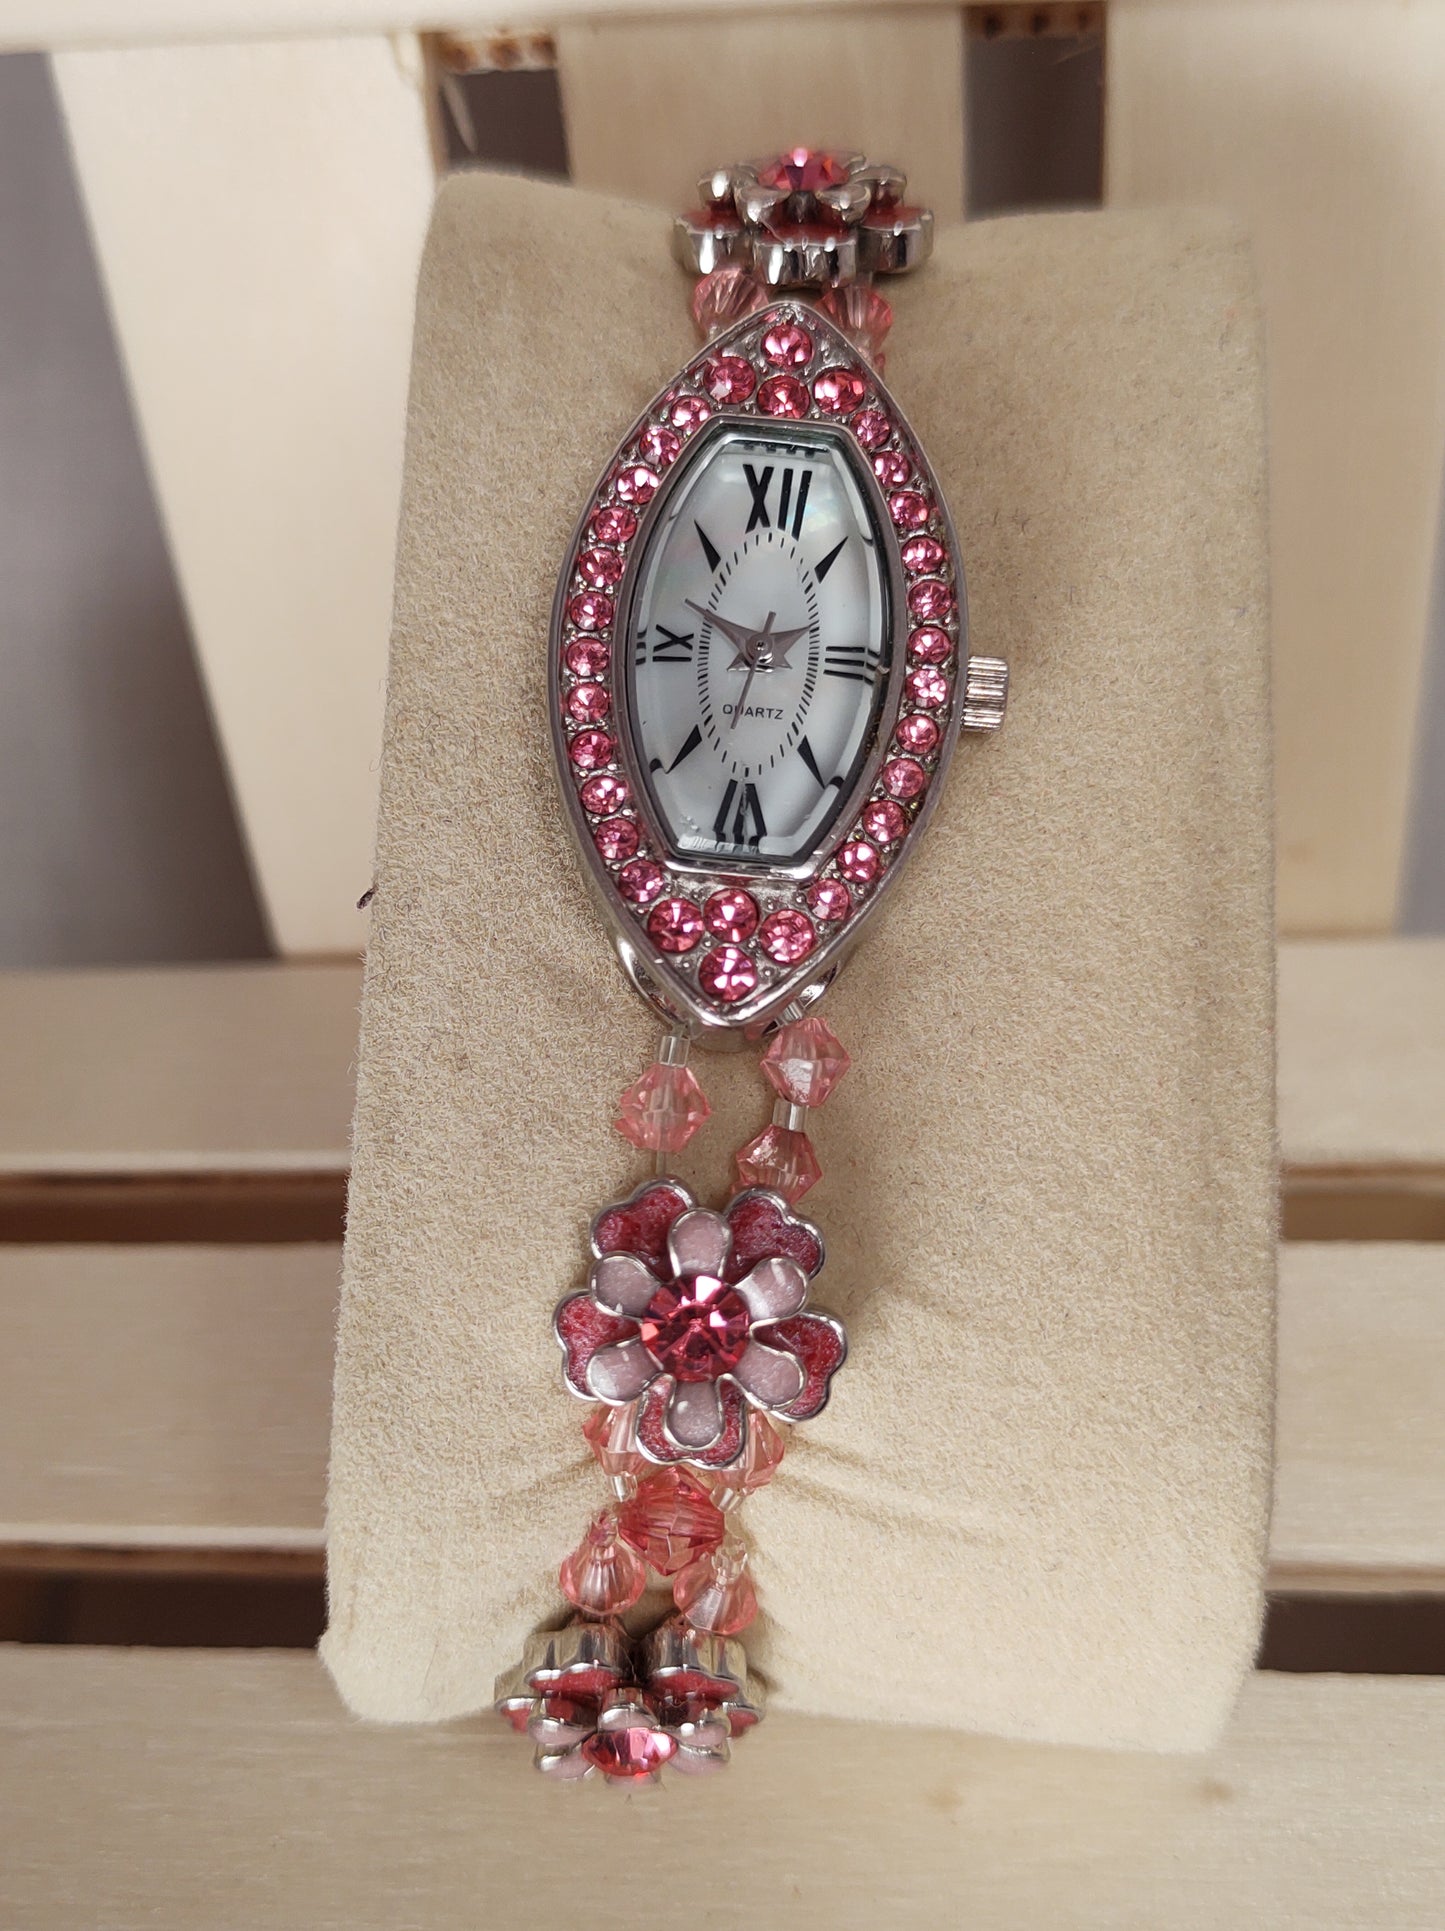 Simple brand pre-owned oval shaped watch surrounded by very nice imitation pink diamonds .. elastic band with flowers and a stainless clasp..light pink dial..Nice spring summer watch..